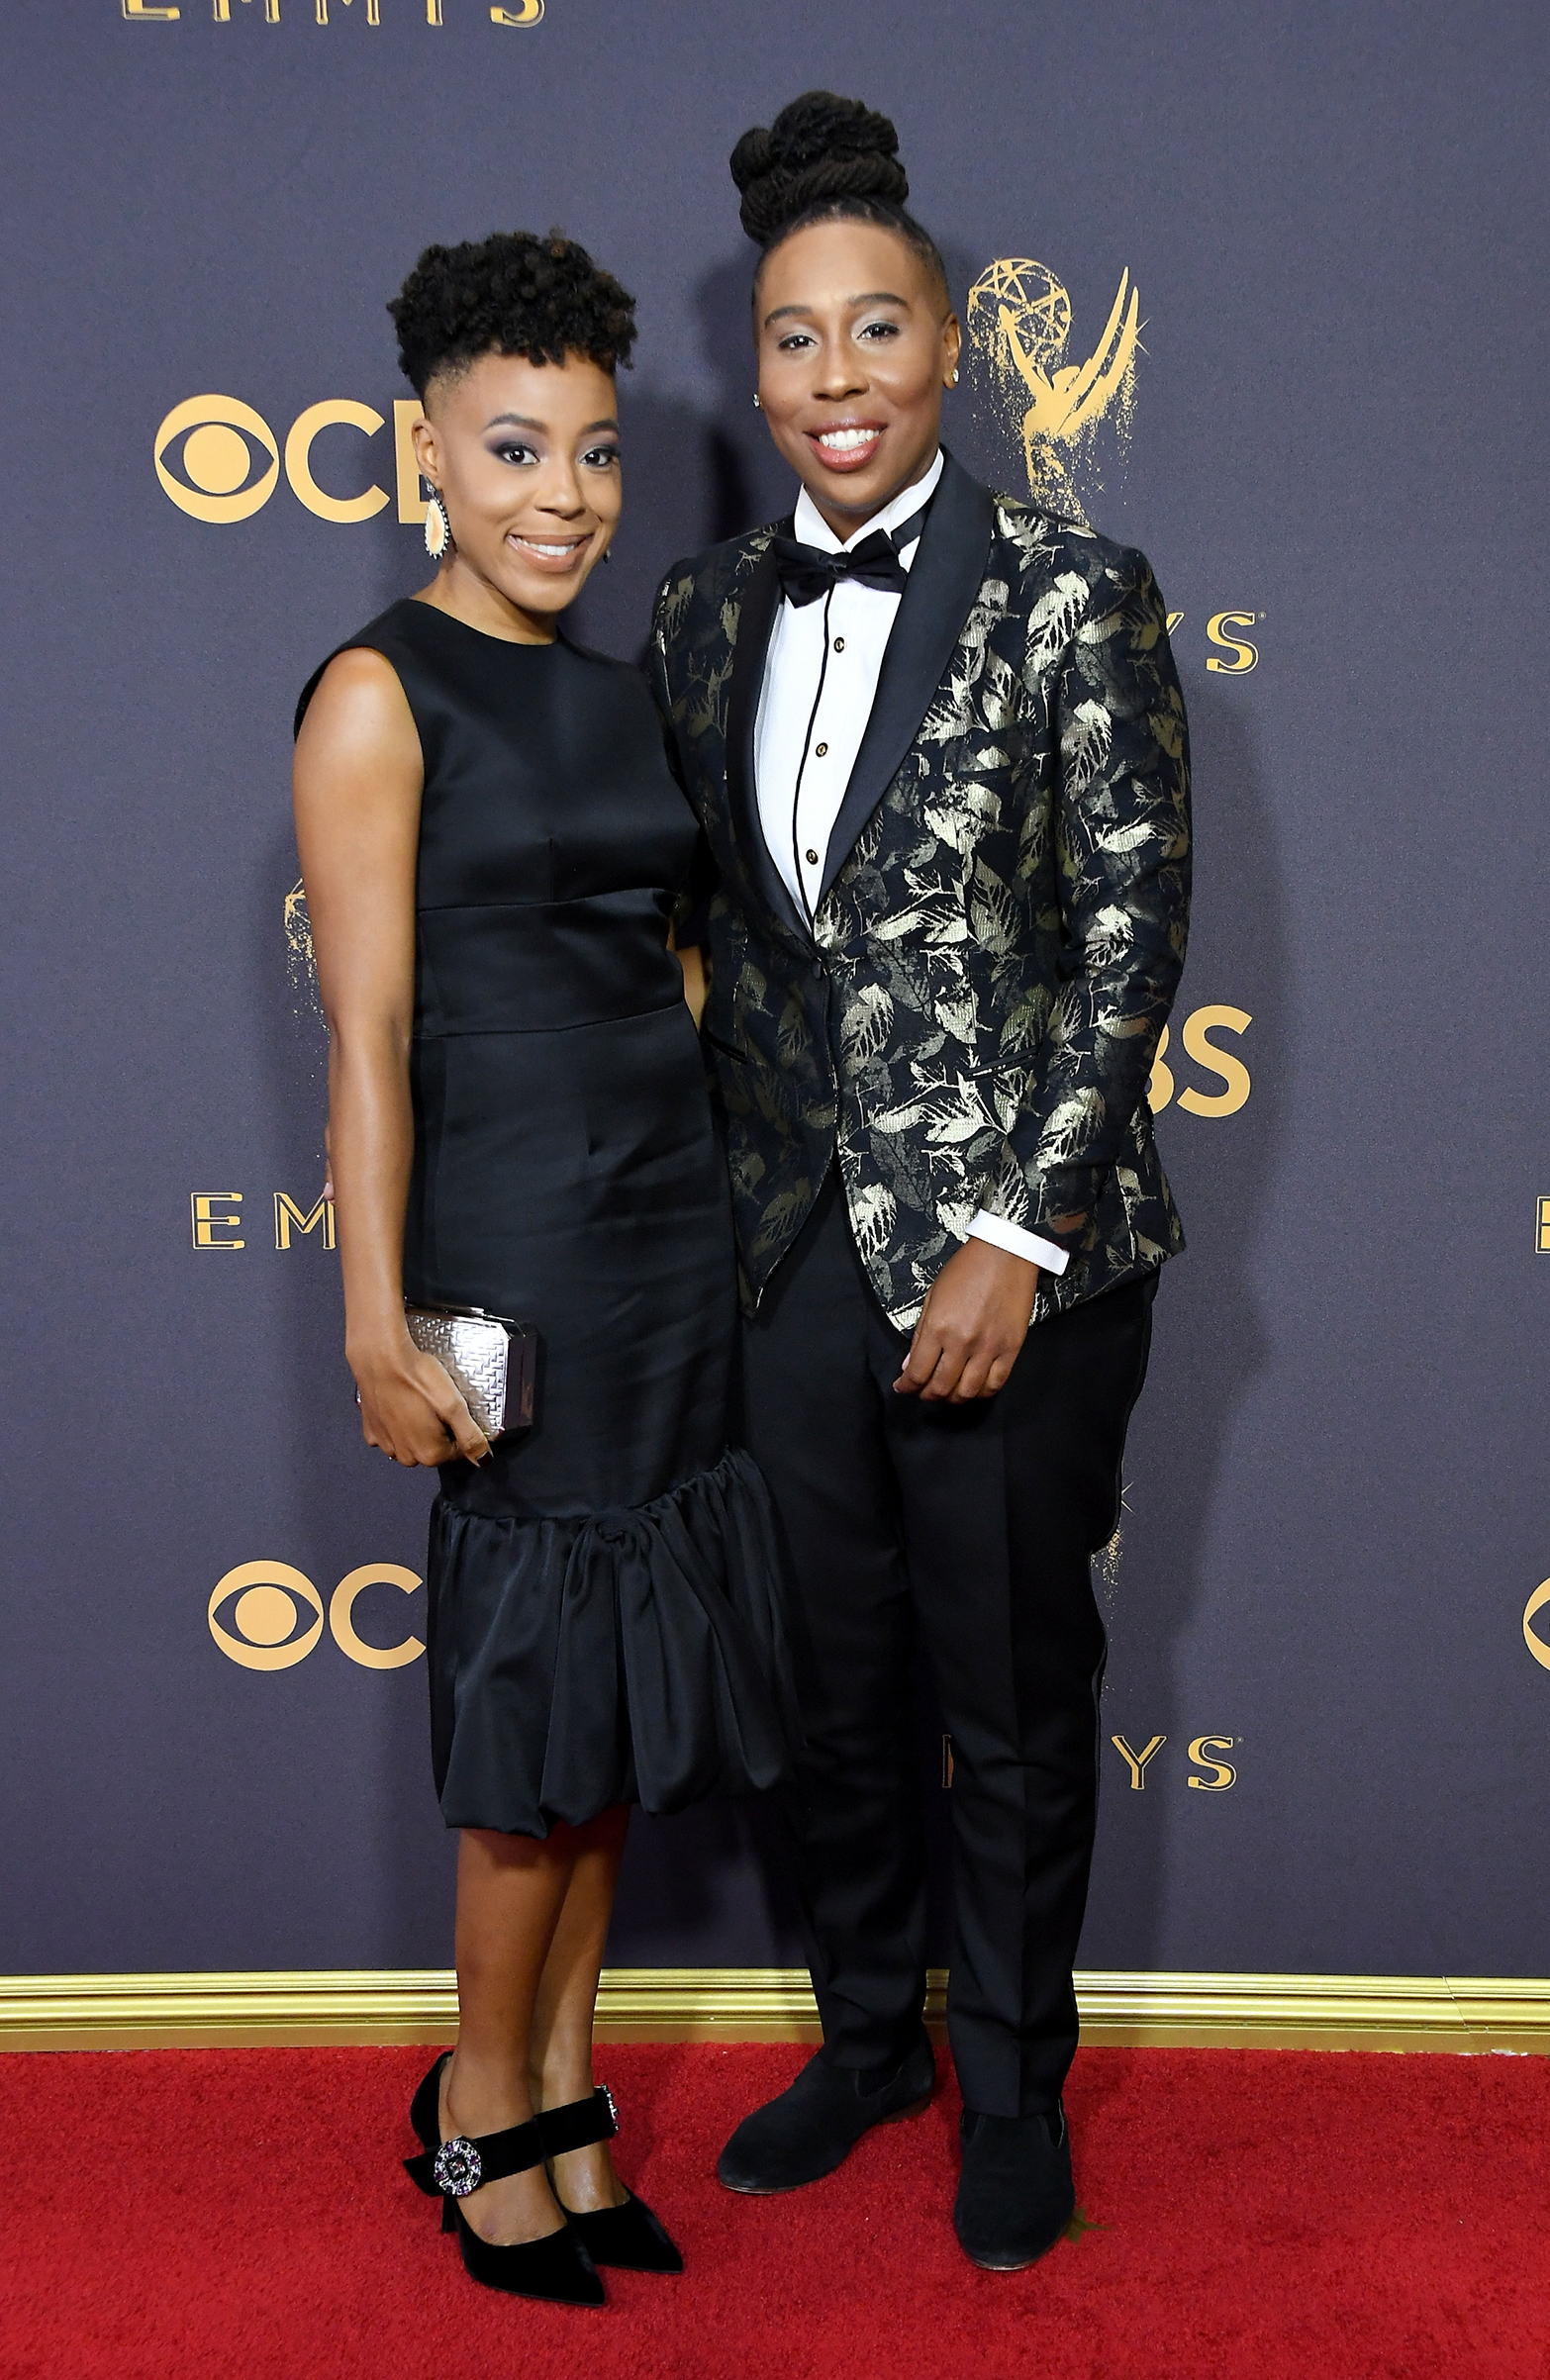 Alana Mayo (L) and Lena Waithe attend the 69th Annual Primetime Emmy Awards at Microsoft Theater on September 17, 2017 in Los Angeles, California.